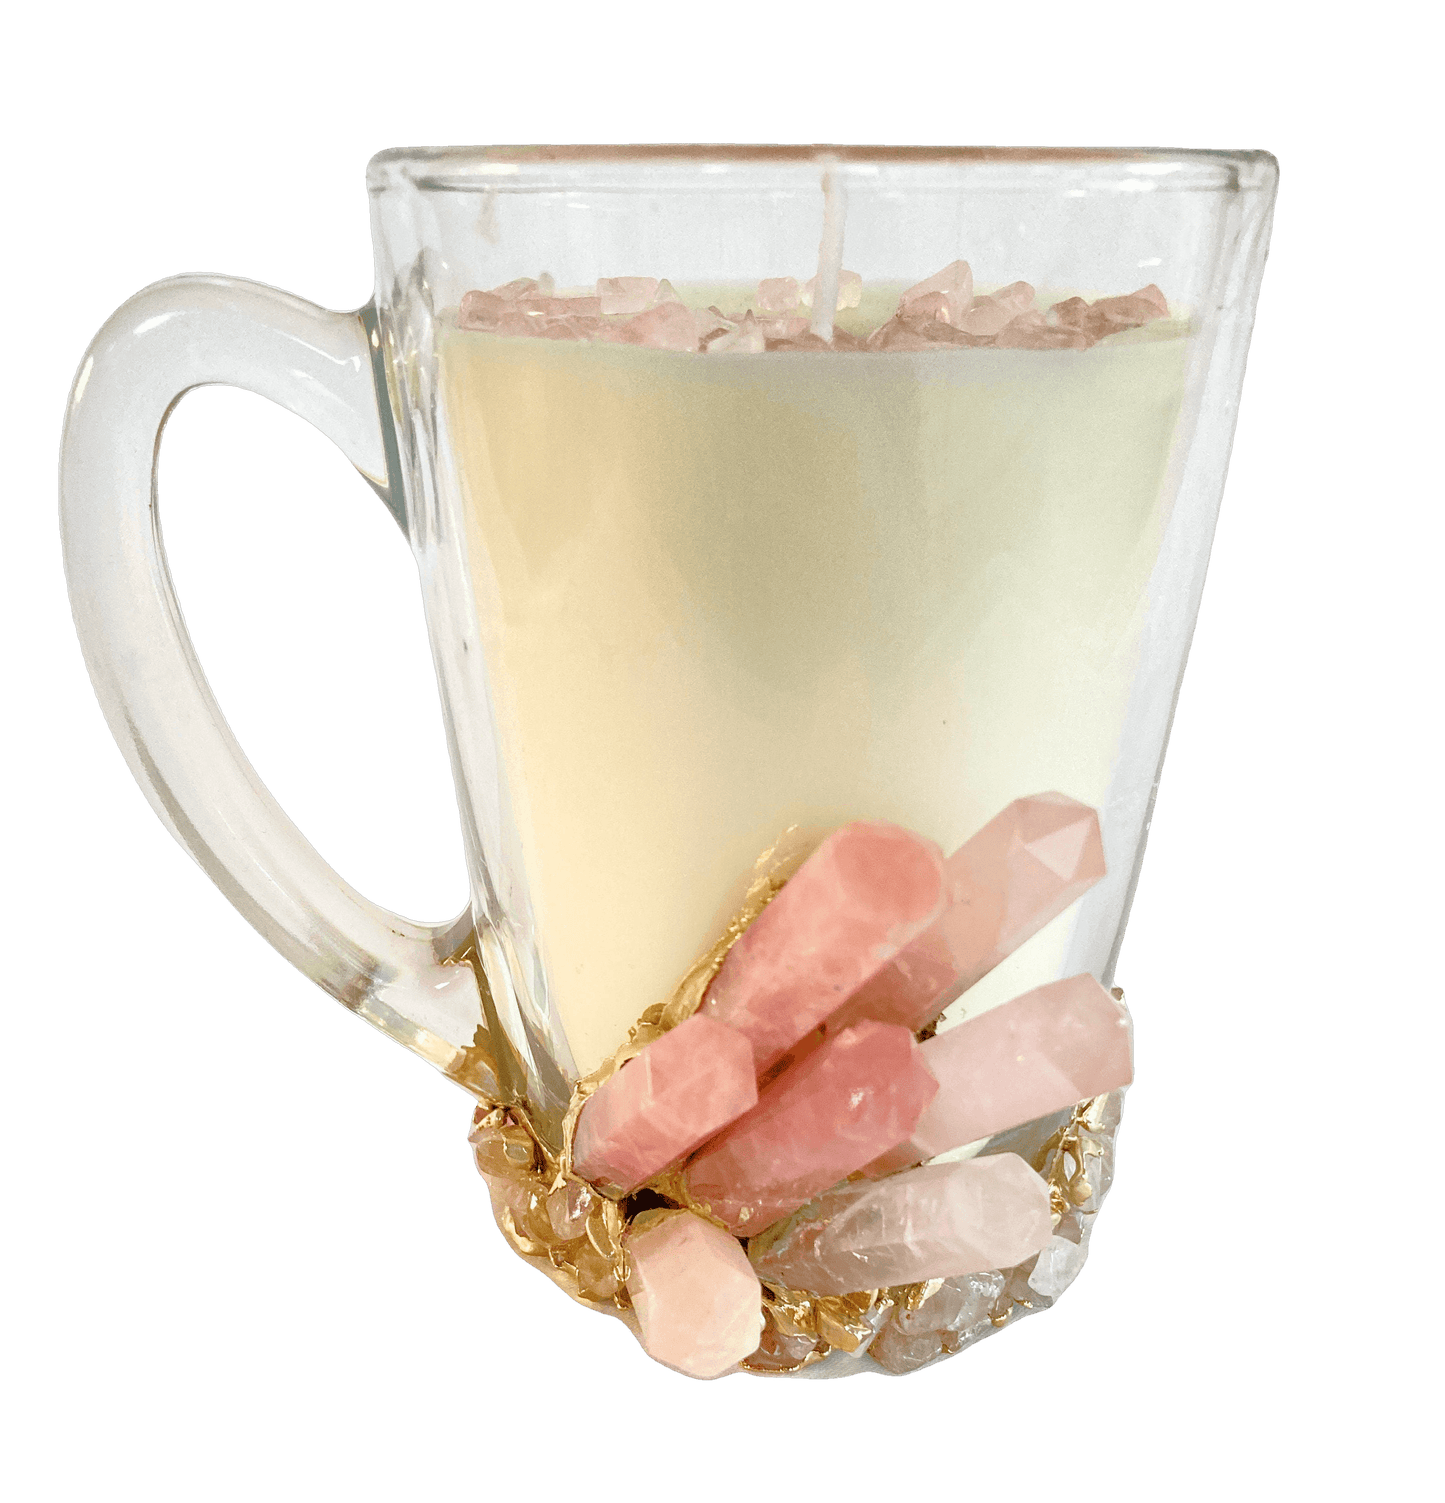 Rose Quartz Crystal Scented Soy Candles in Glass Mug - Set of 2 - MAIA HOMES